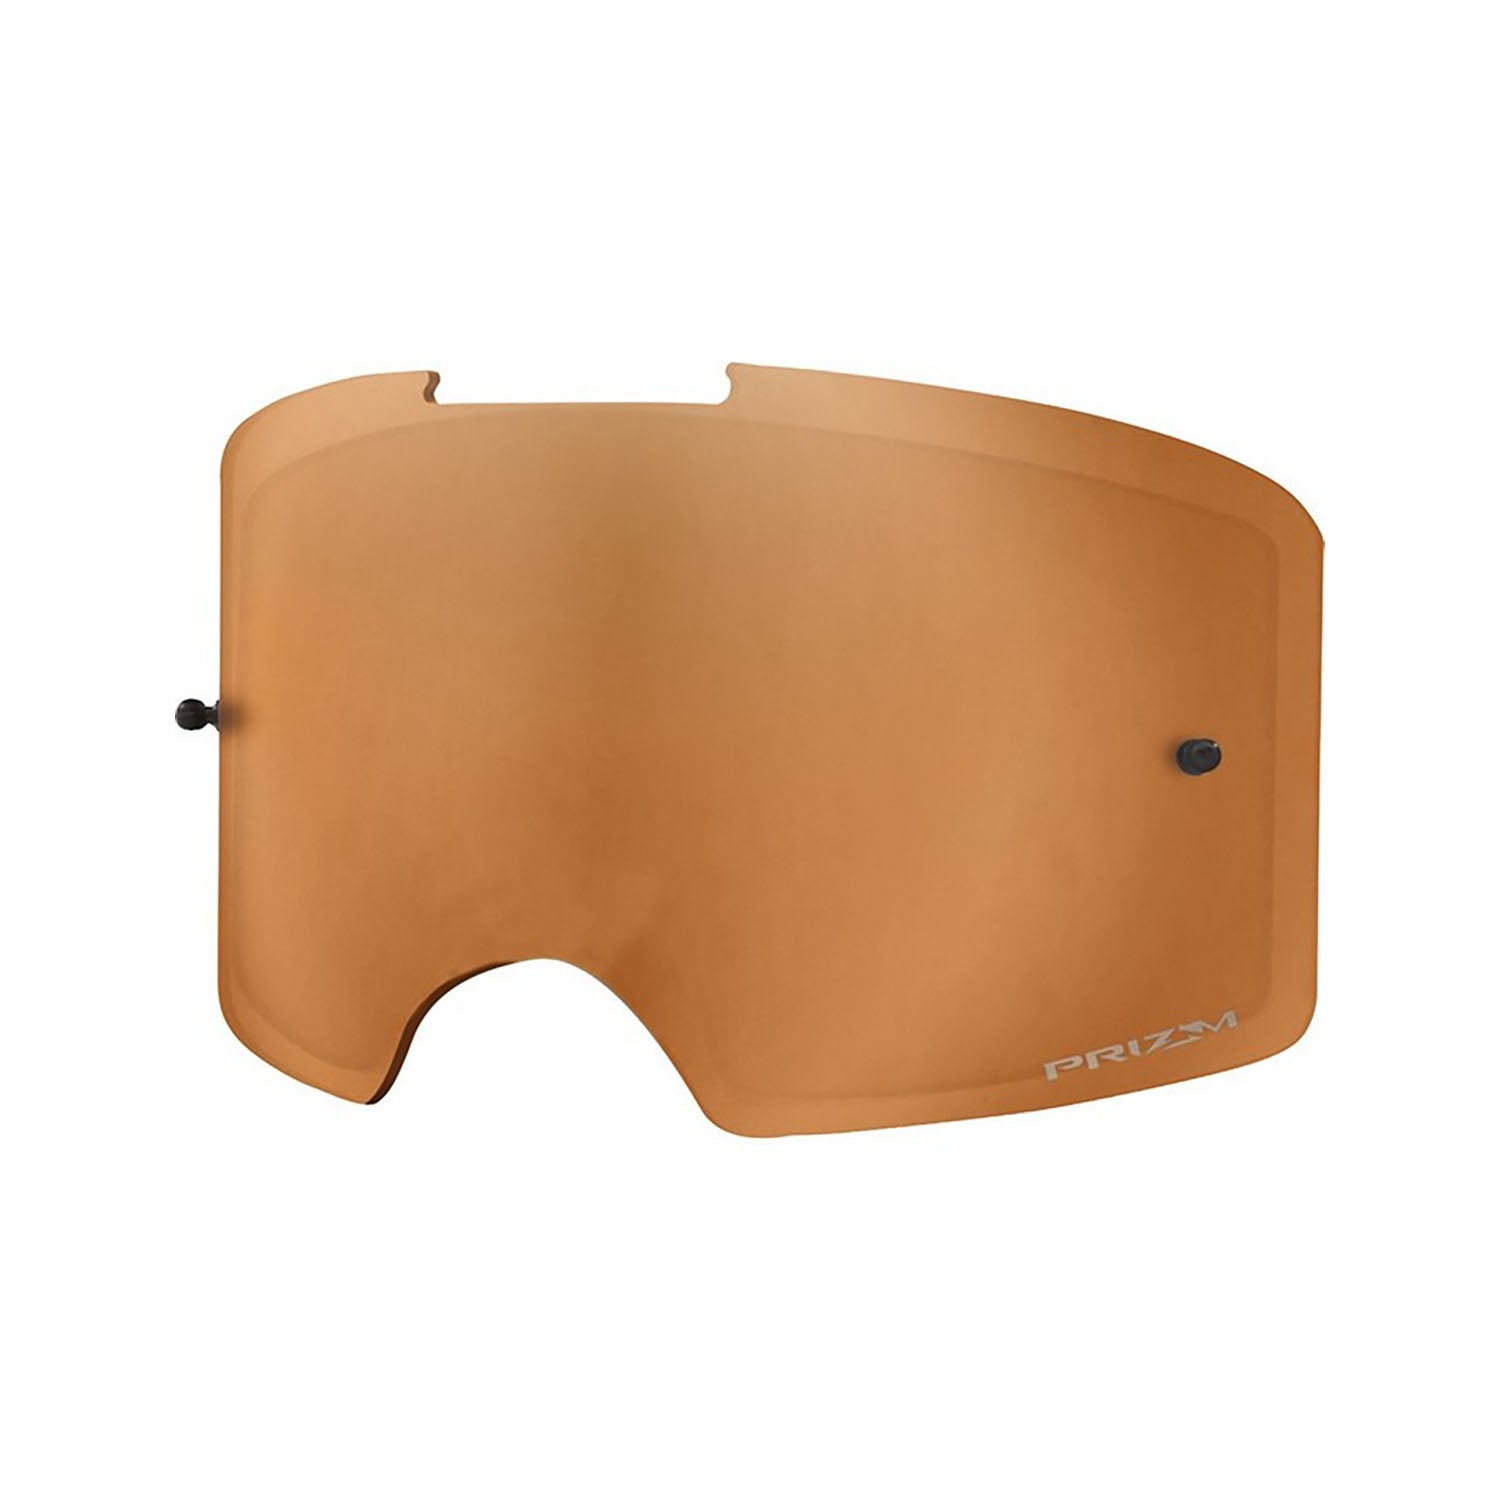 Oakley Front Line MX Replacement Lens in Prizm Bronze Color